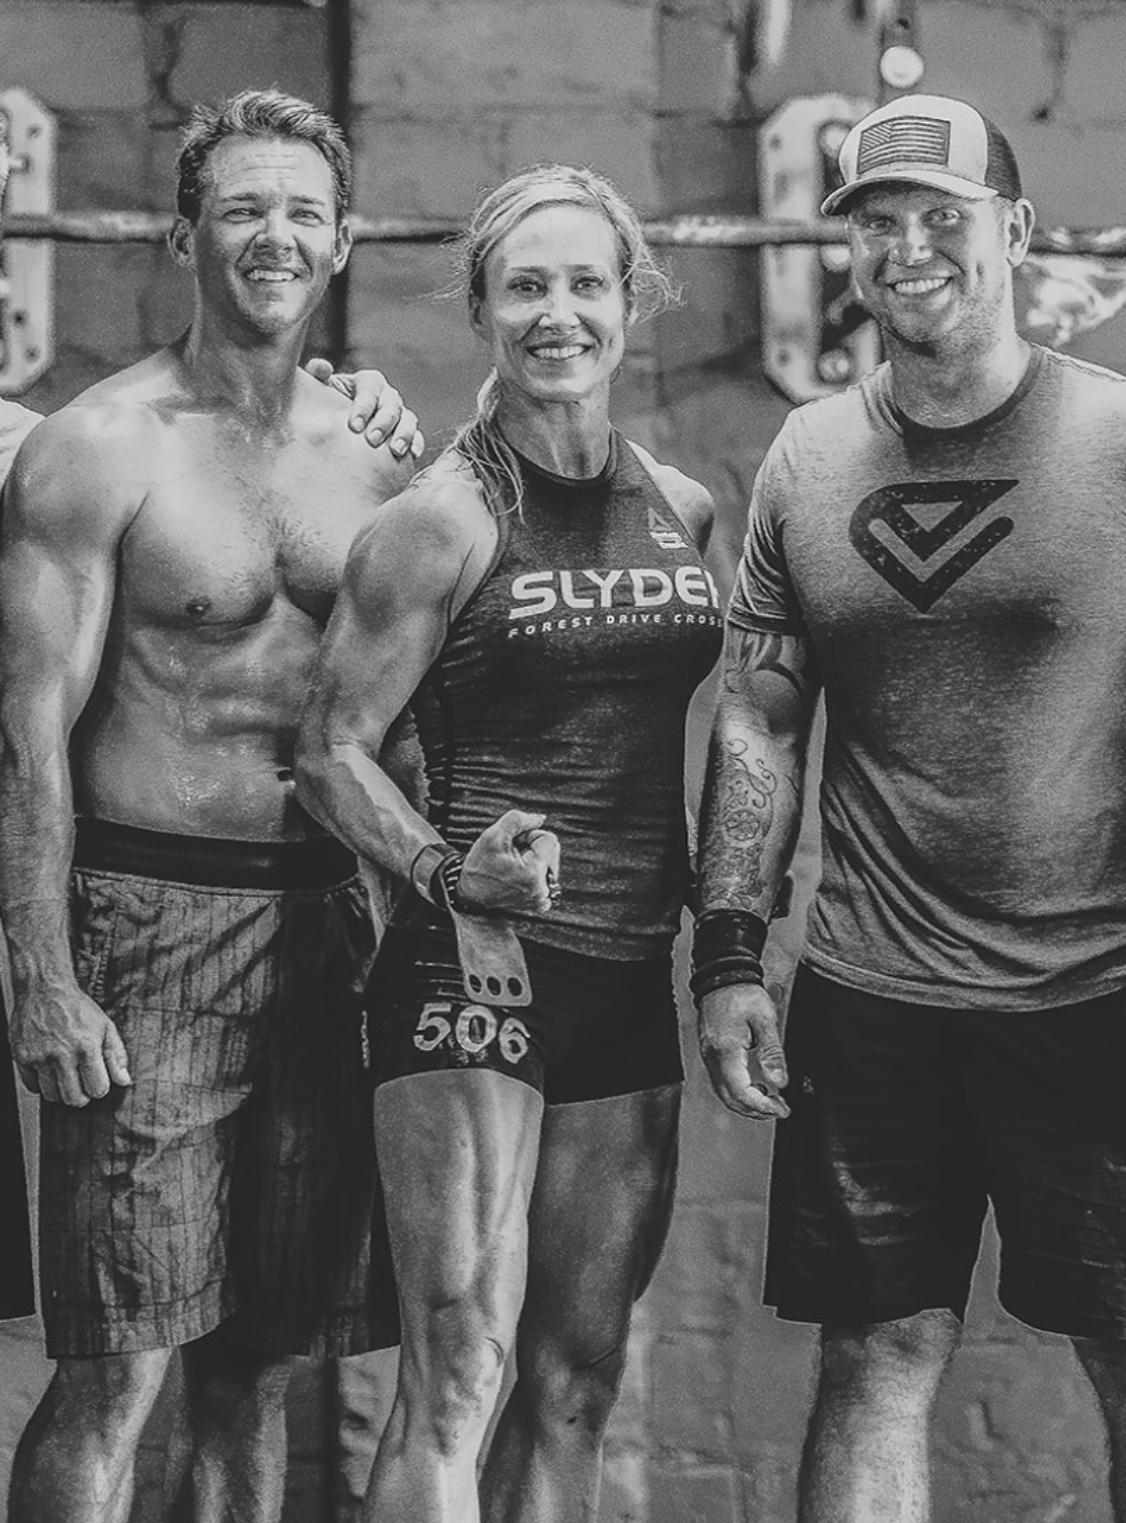 Jana is flanked by longtime friends and training partners Scott Fitzgerald and Corey Levi. Corey is also one of Jana’s CrossFit coaches.